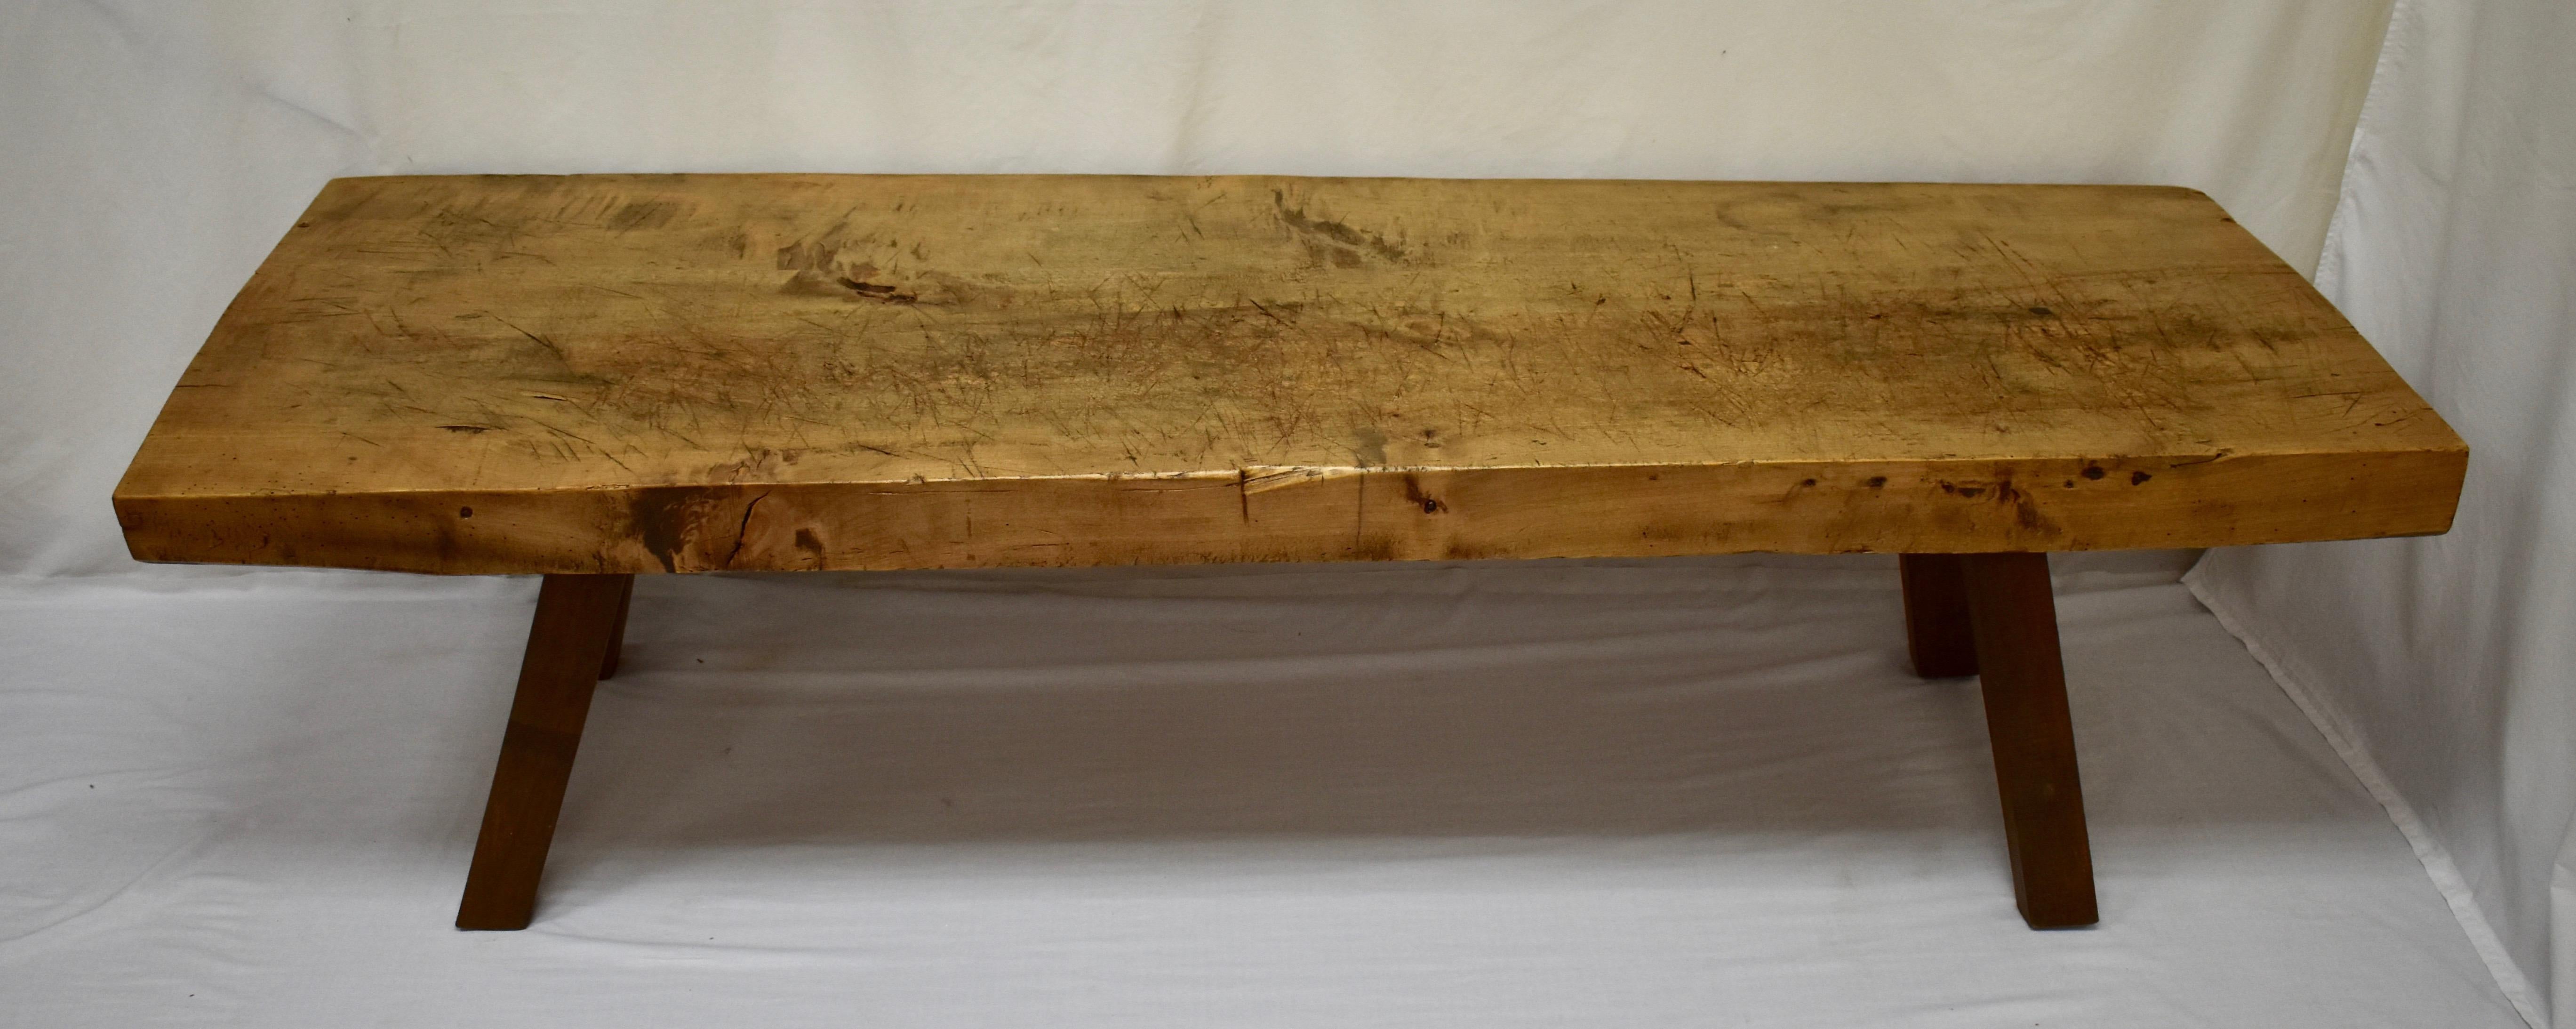 This is a truly massive oak pig bench low table, quite the largest we’ve found recently. It stands on four sturdy hand-hewn splayed legs which are mortised into the underside of the top. The top itself is a single oak slab over 3” thick, with a